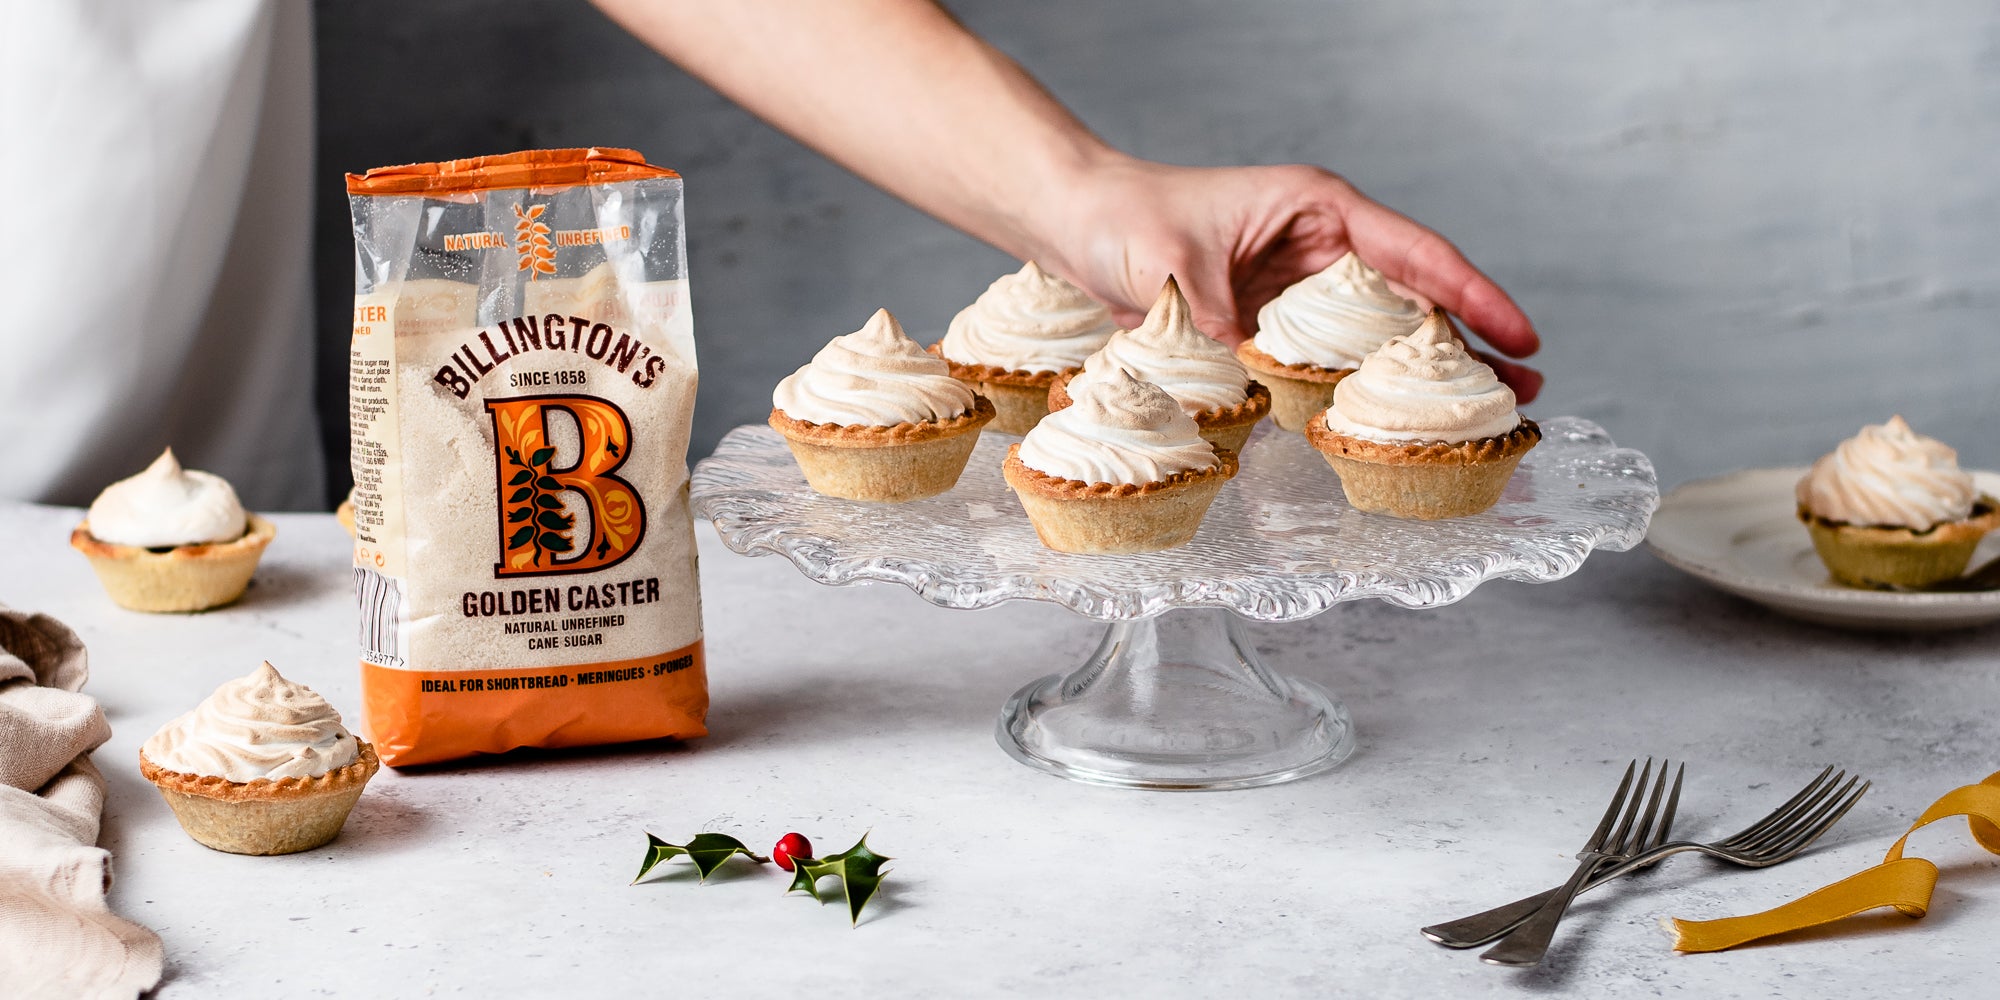 Meringue Topped Mince Pies on a glass cake stand with a hand reaching for one next to a bag of Billington's golden caster sugar